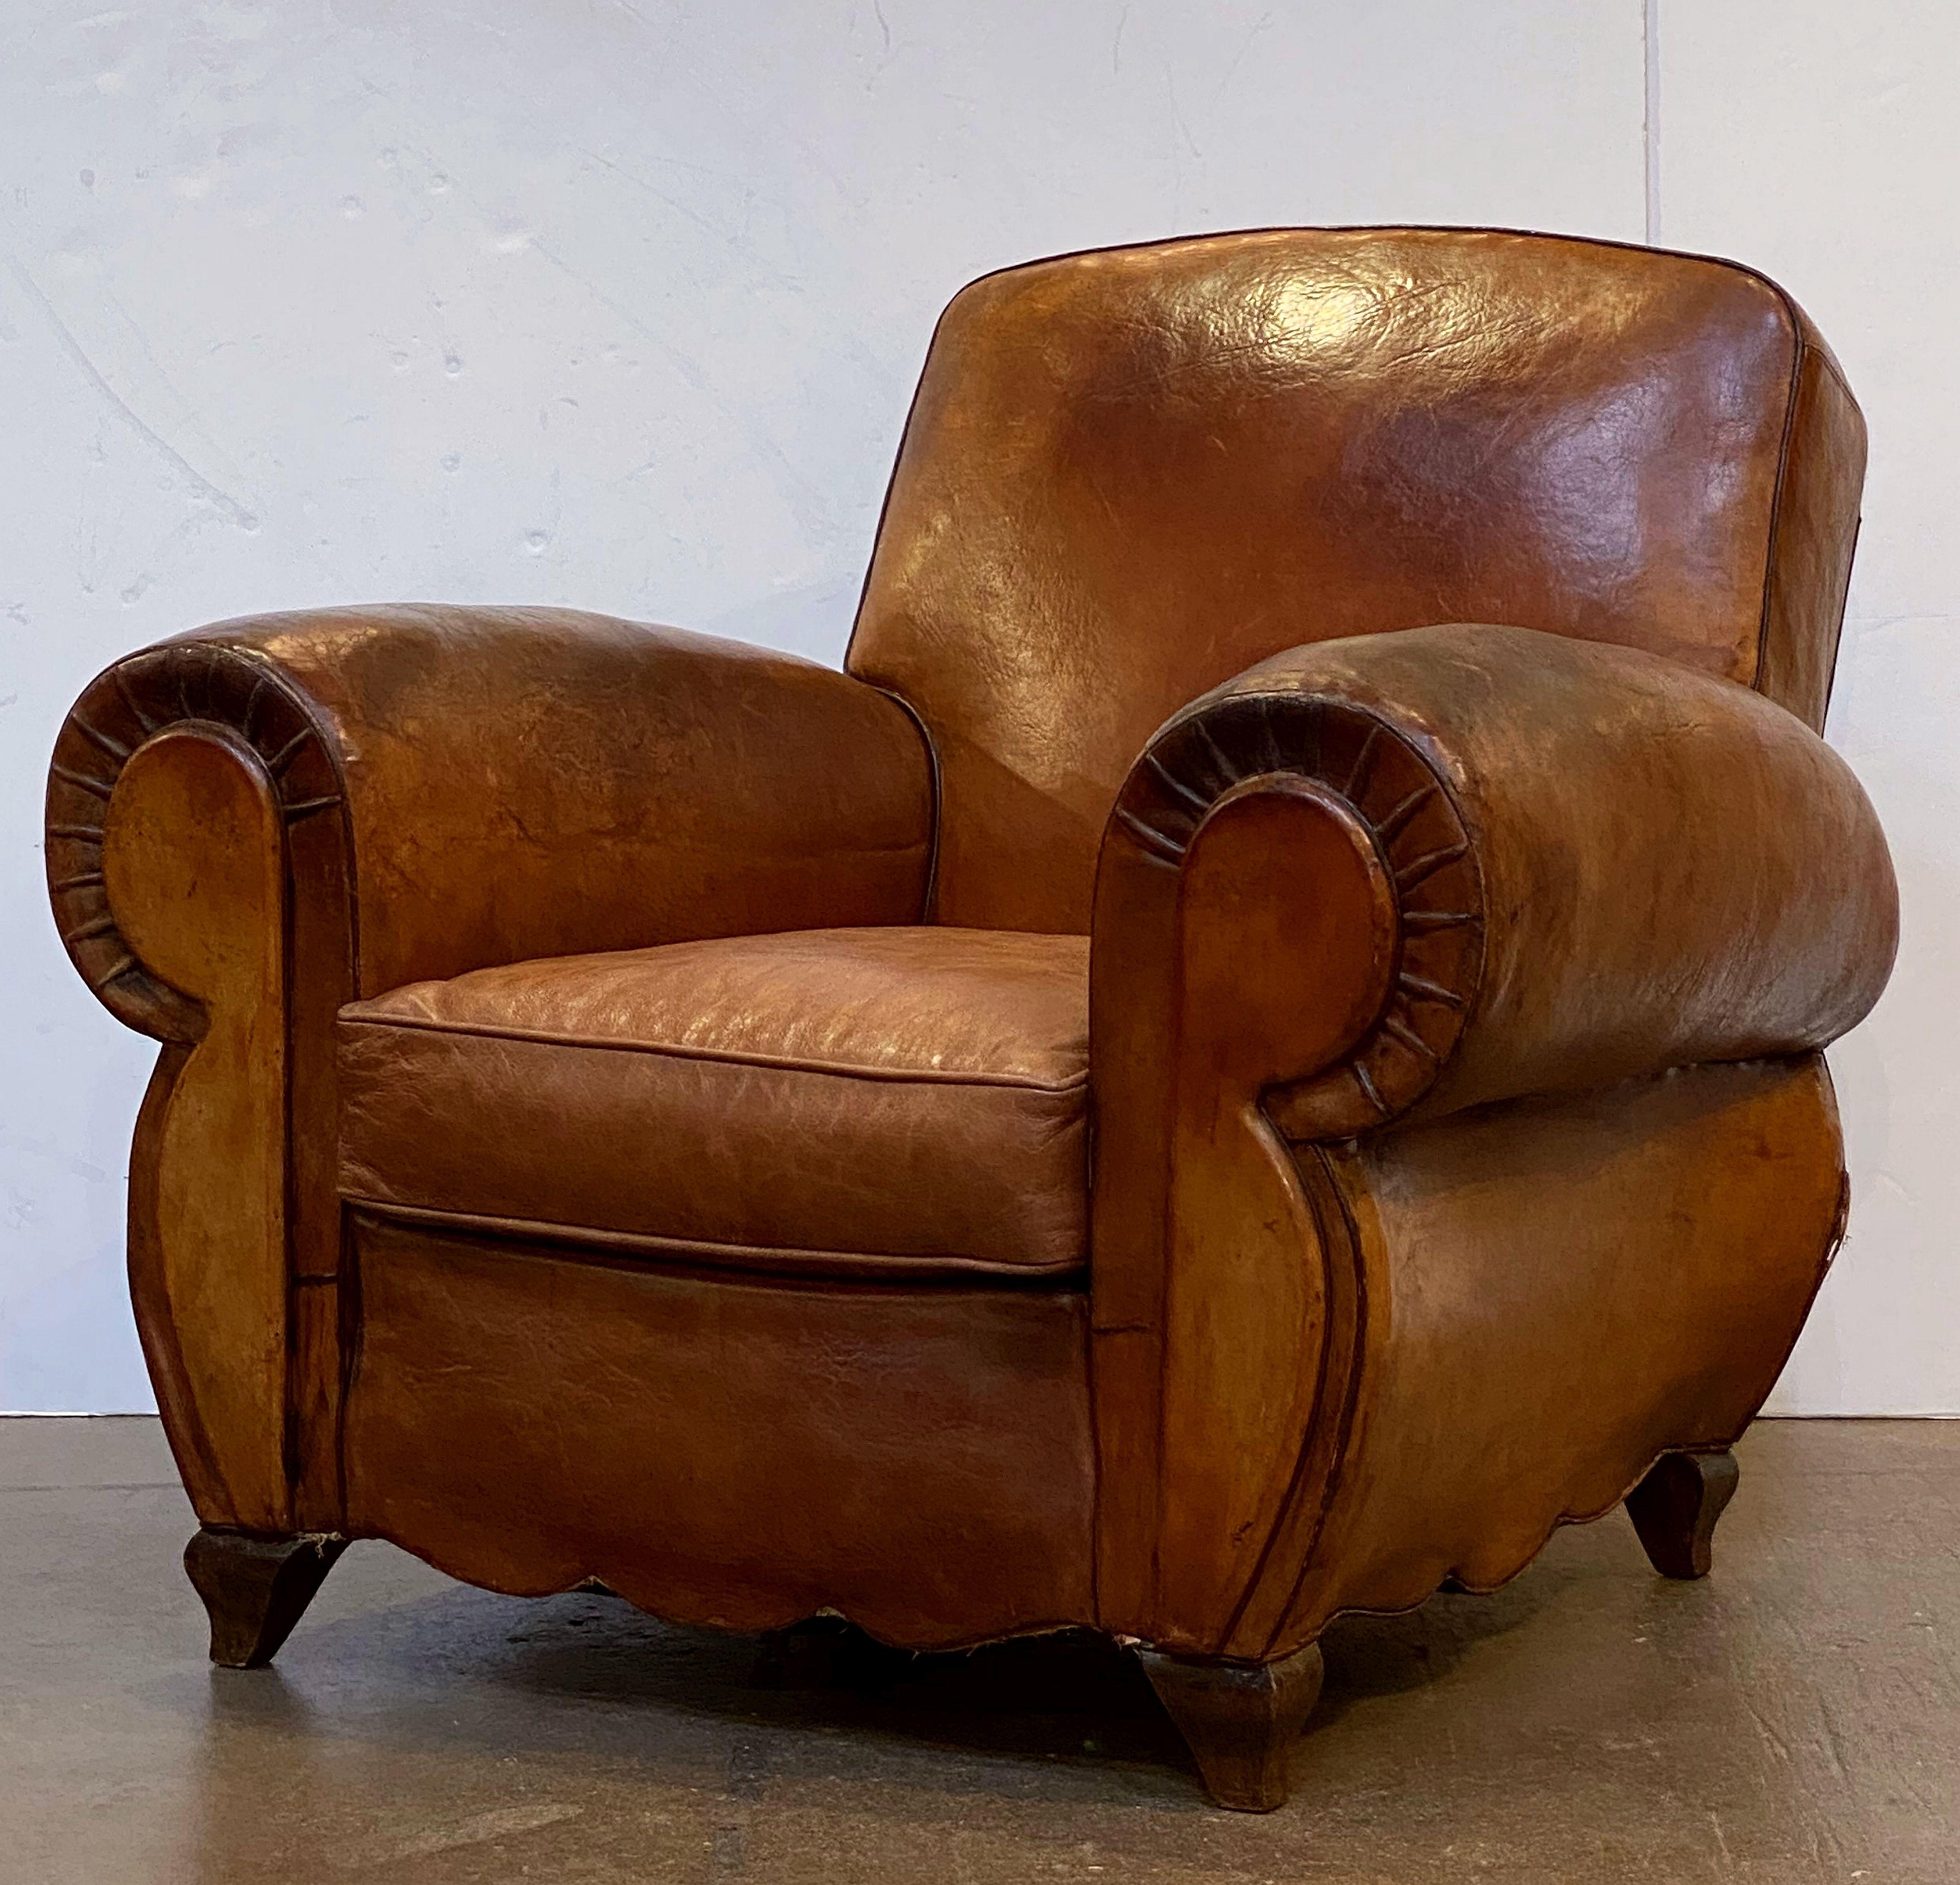 Pair of French Art Deco Leather Club Chairs 'Priced Individually' (20. Jahrhundert)